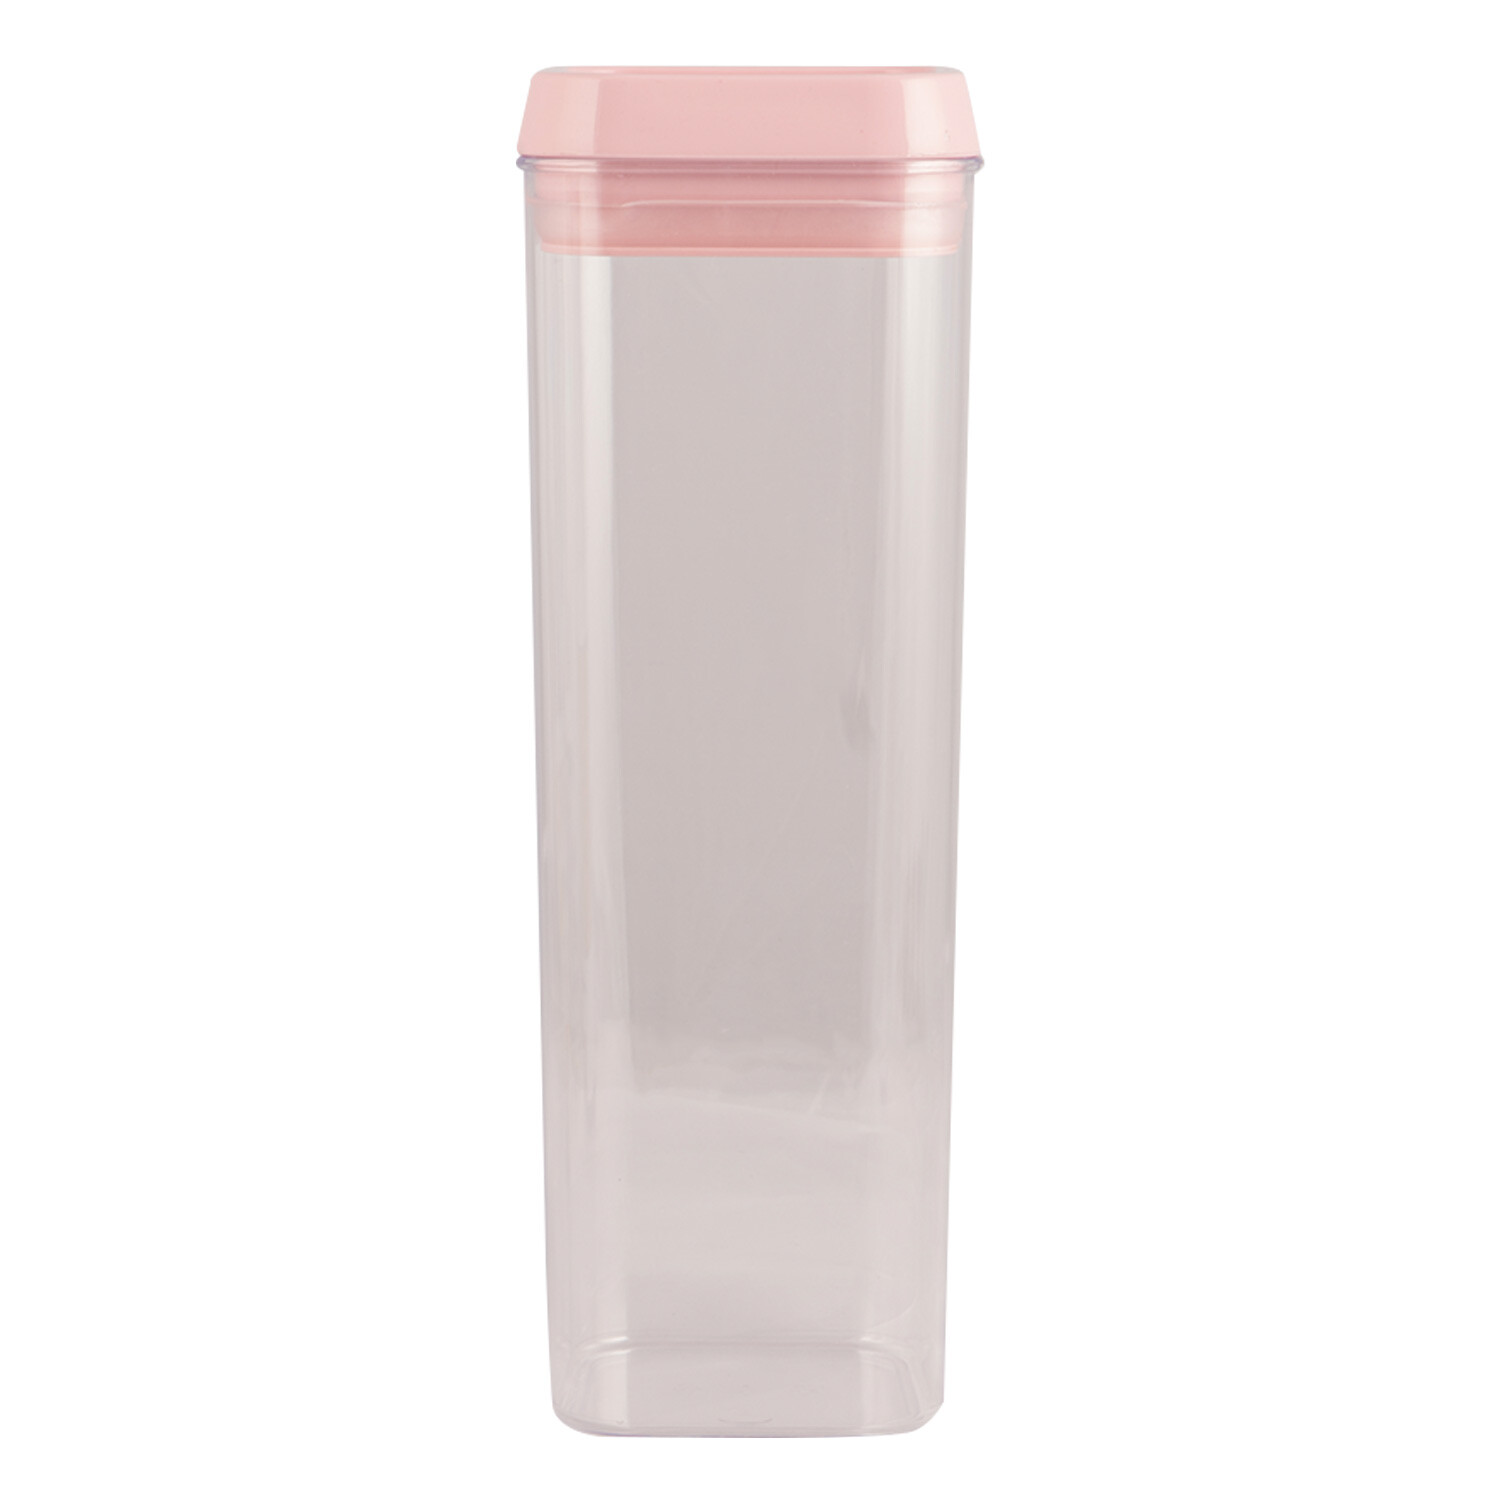 Airtight Food Container - 1.7l Image